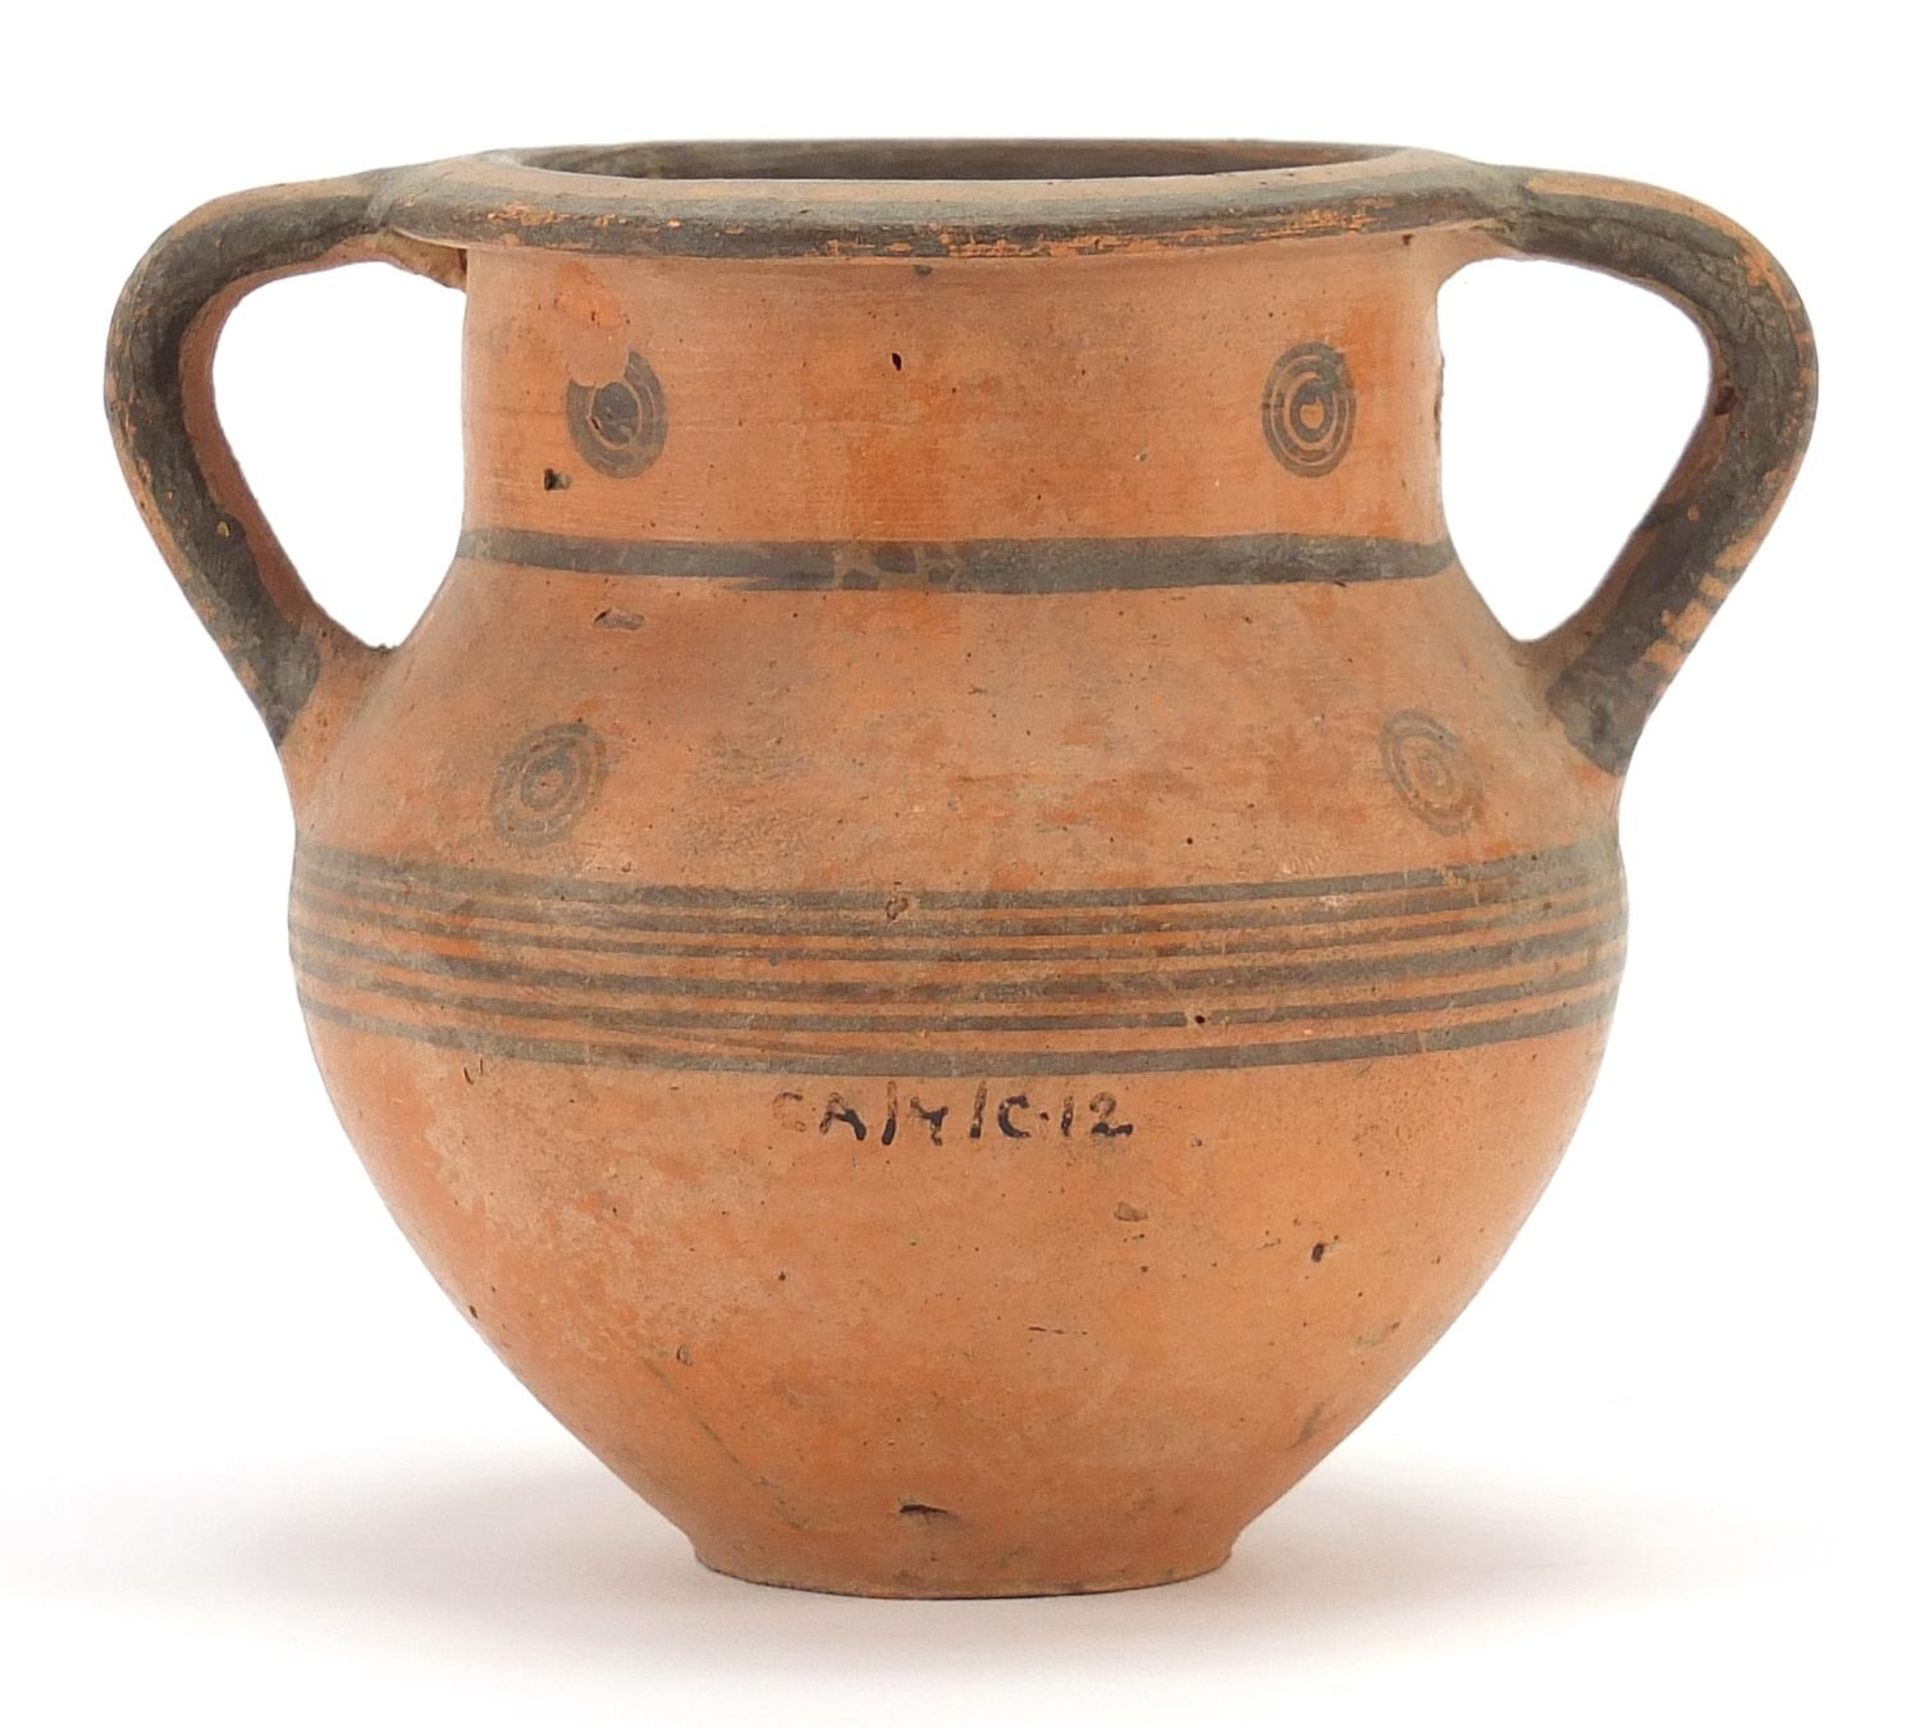 Cypriot miniature pottery krater with twin handles, 8.5cm high - Image 2 of 5